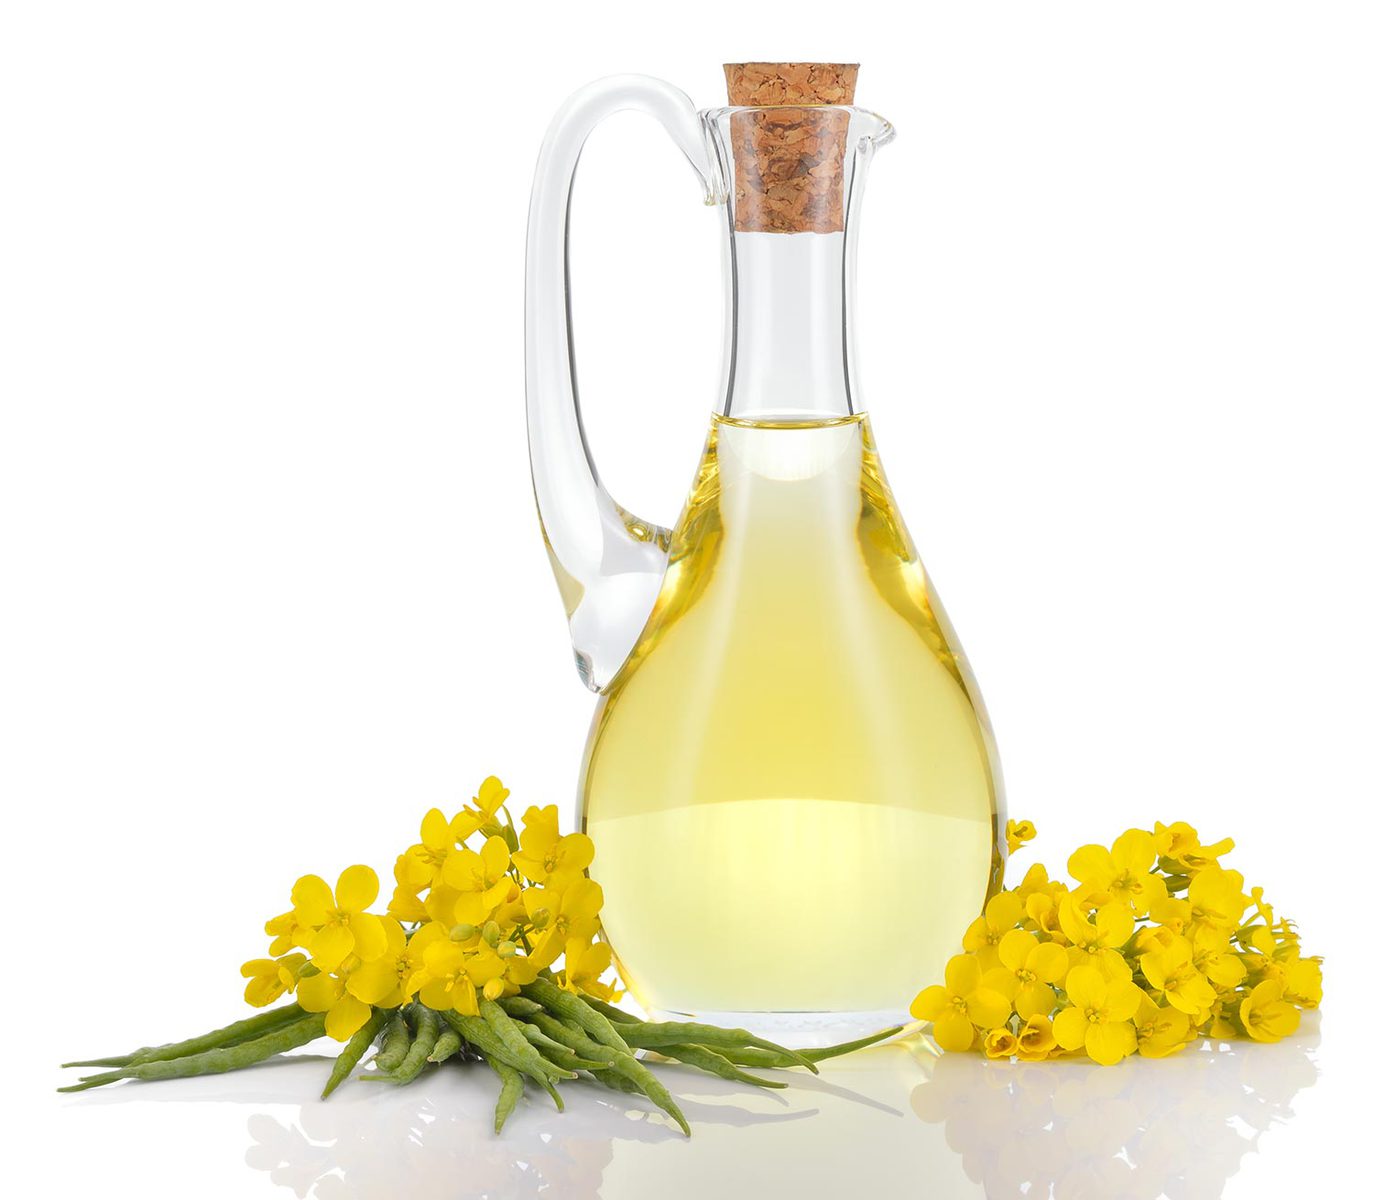 Rapeseed oil in decanter oilseed rape flowers and seeds